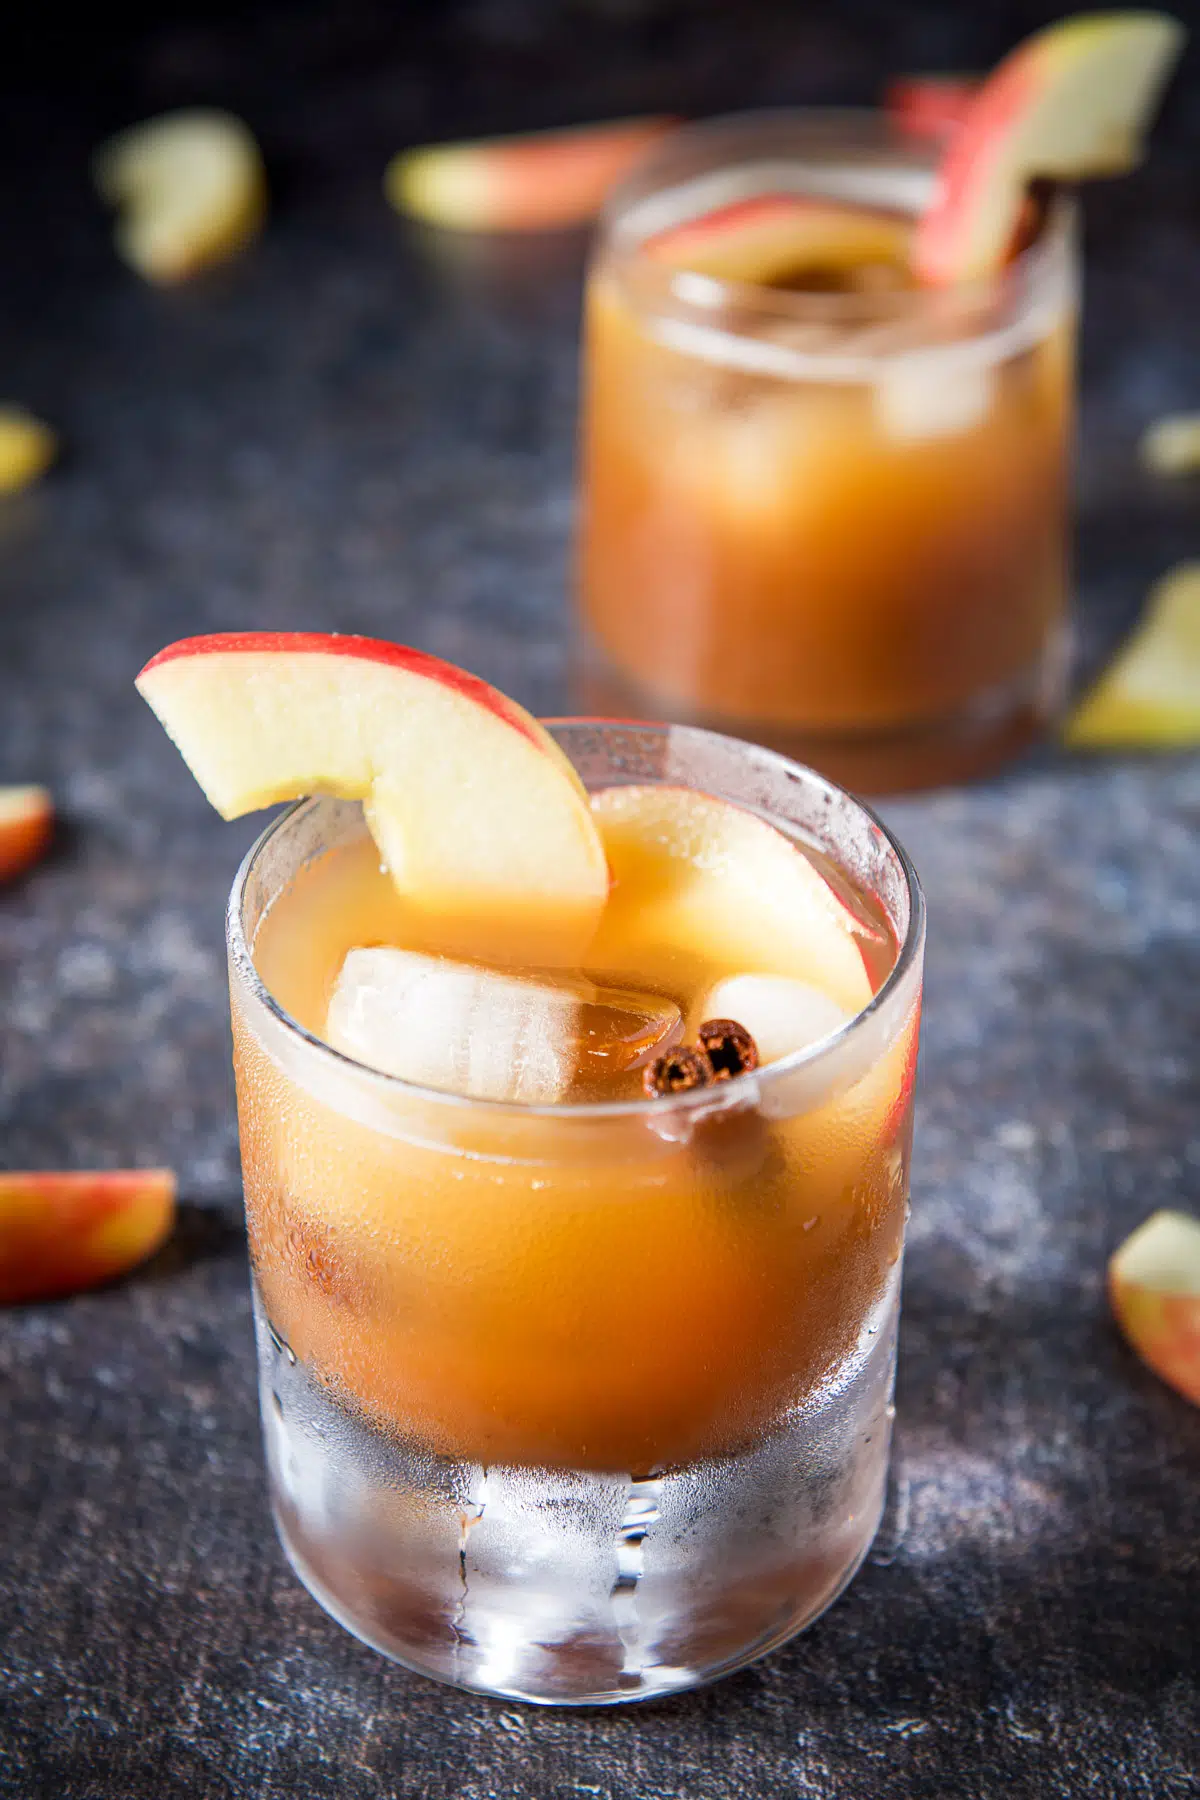 A thick bottom glass filled with the old fashioned with a cinnamon stick and apple slices